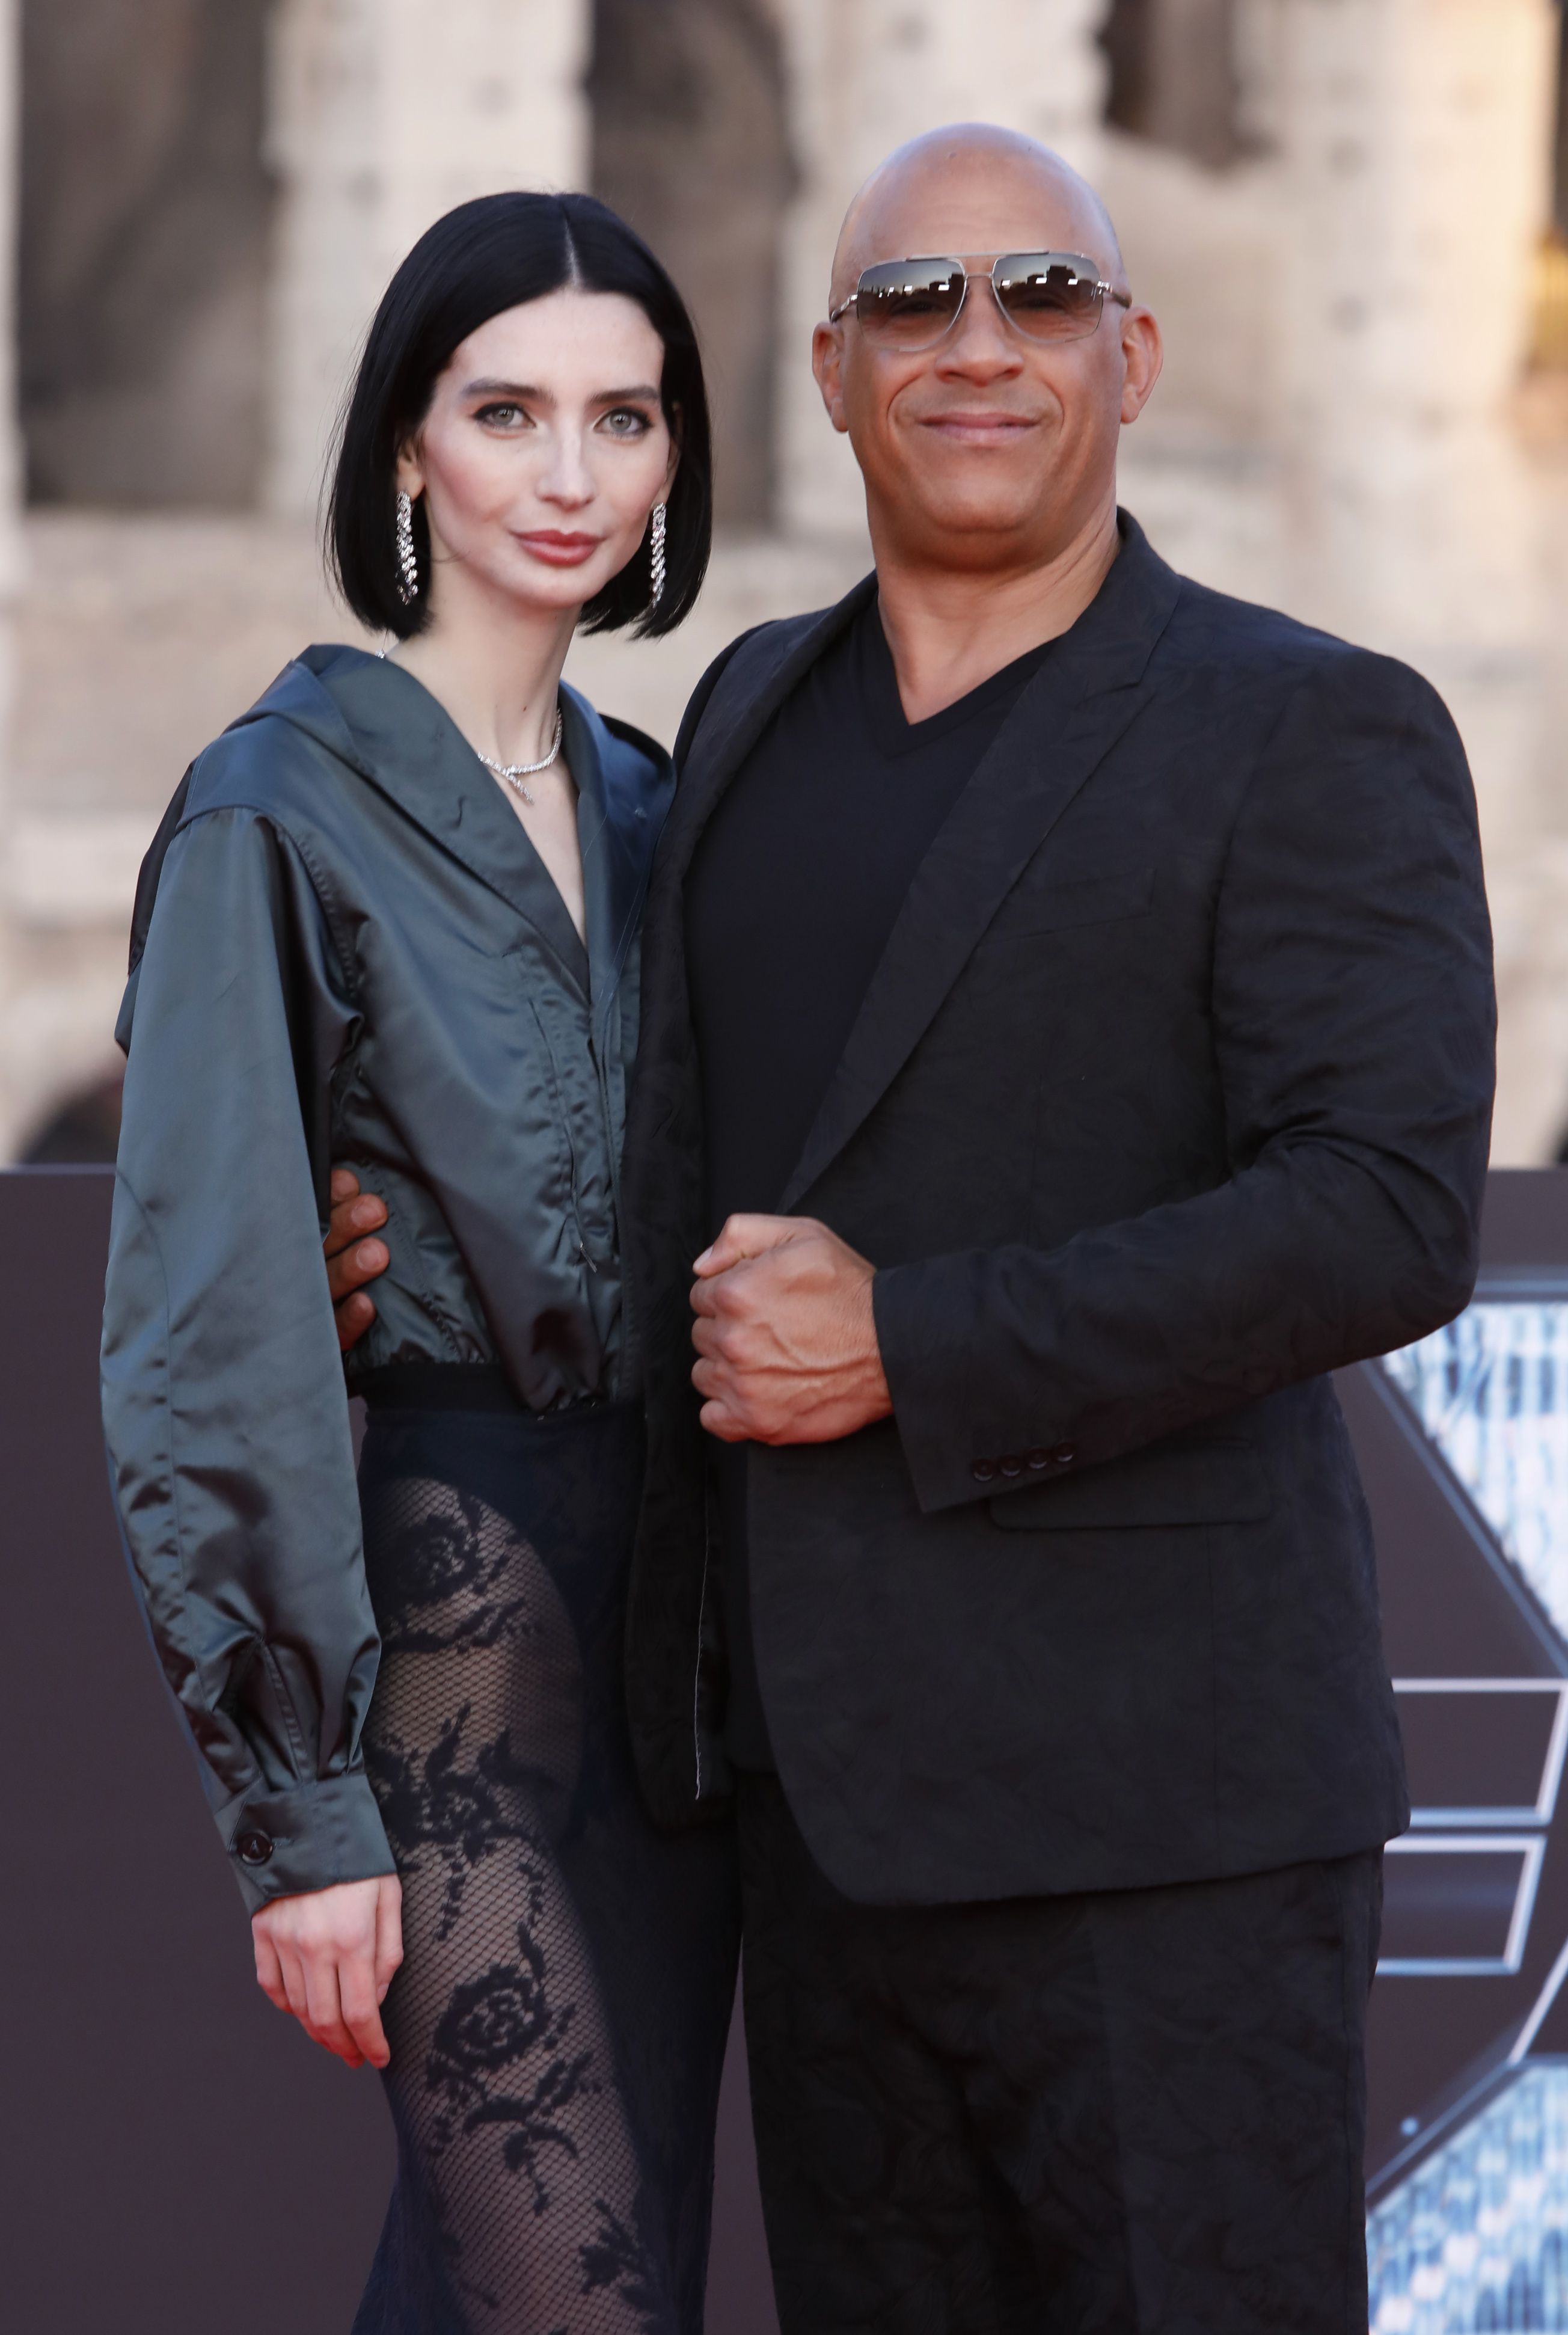 Vin Diesel and Meadow Walker at "Fast X" premiere at the Colosseum monument in Rome on May 12, 2023 | Source: Getty Images